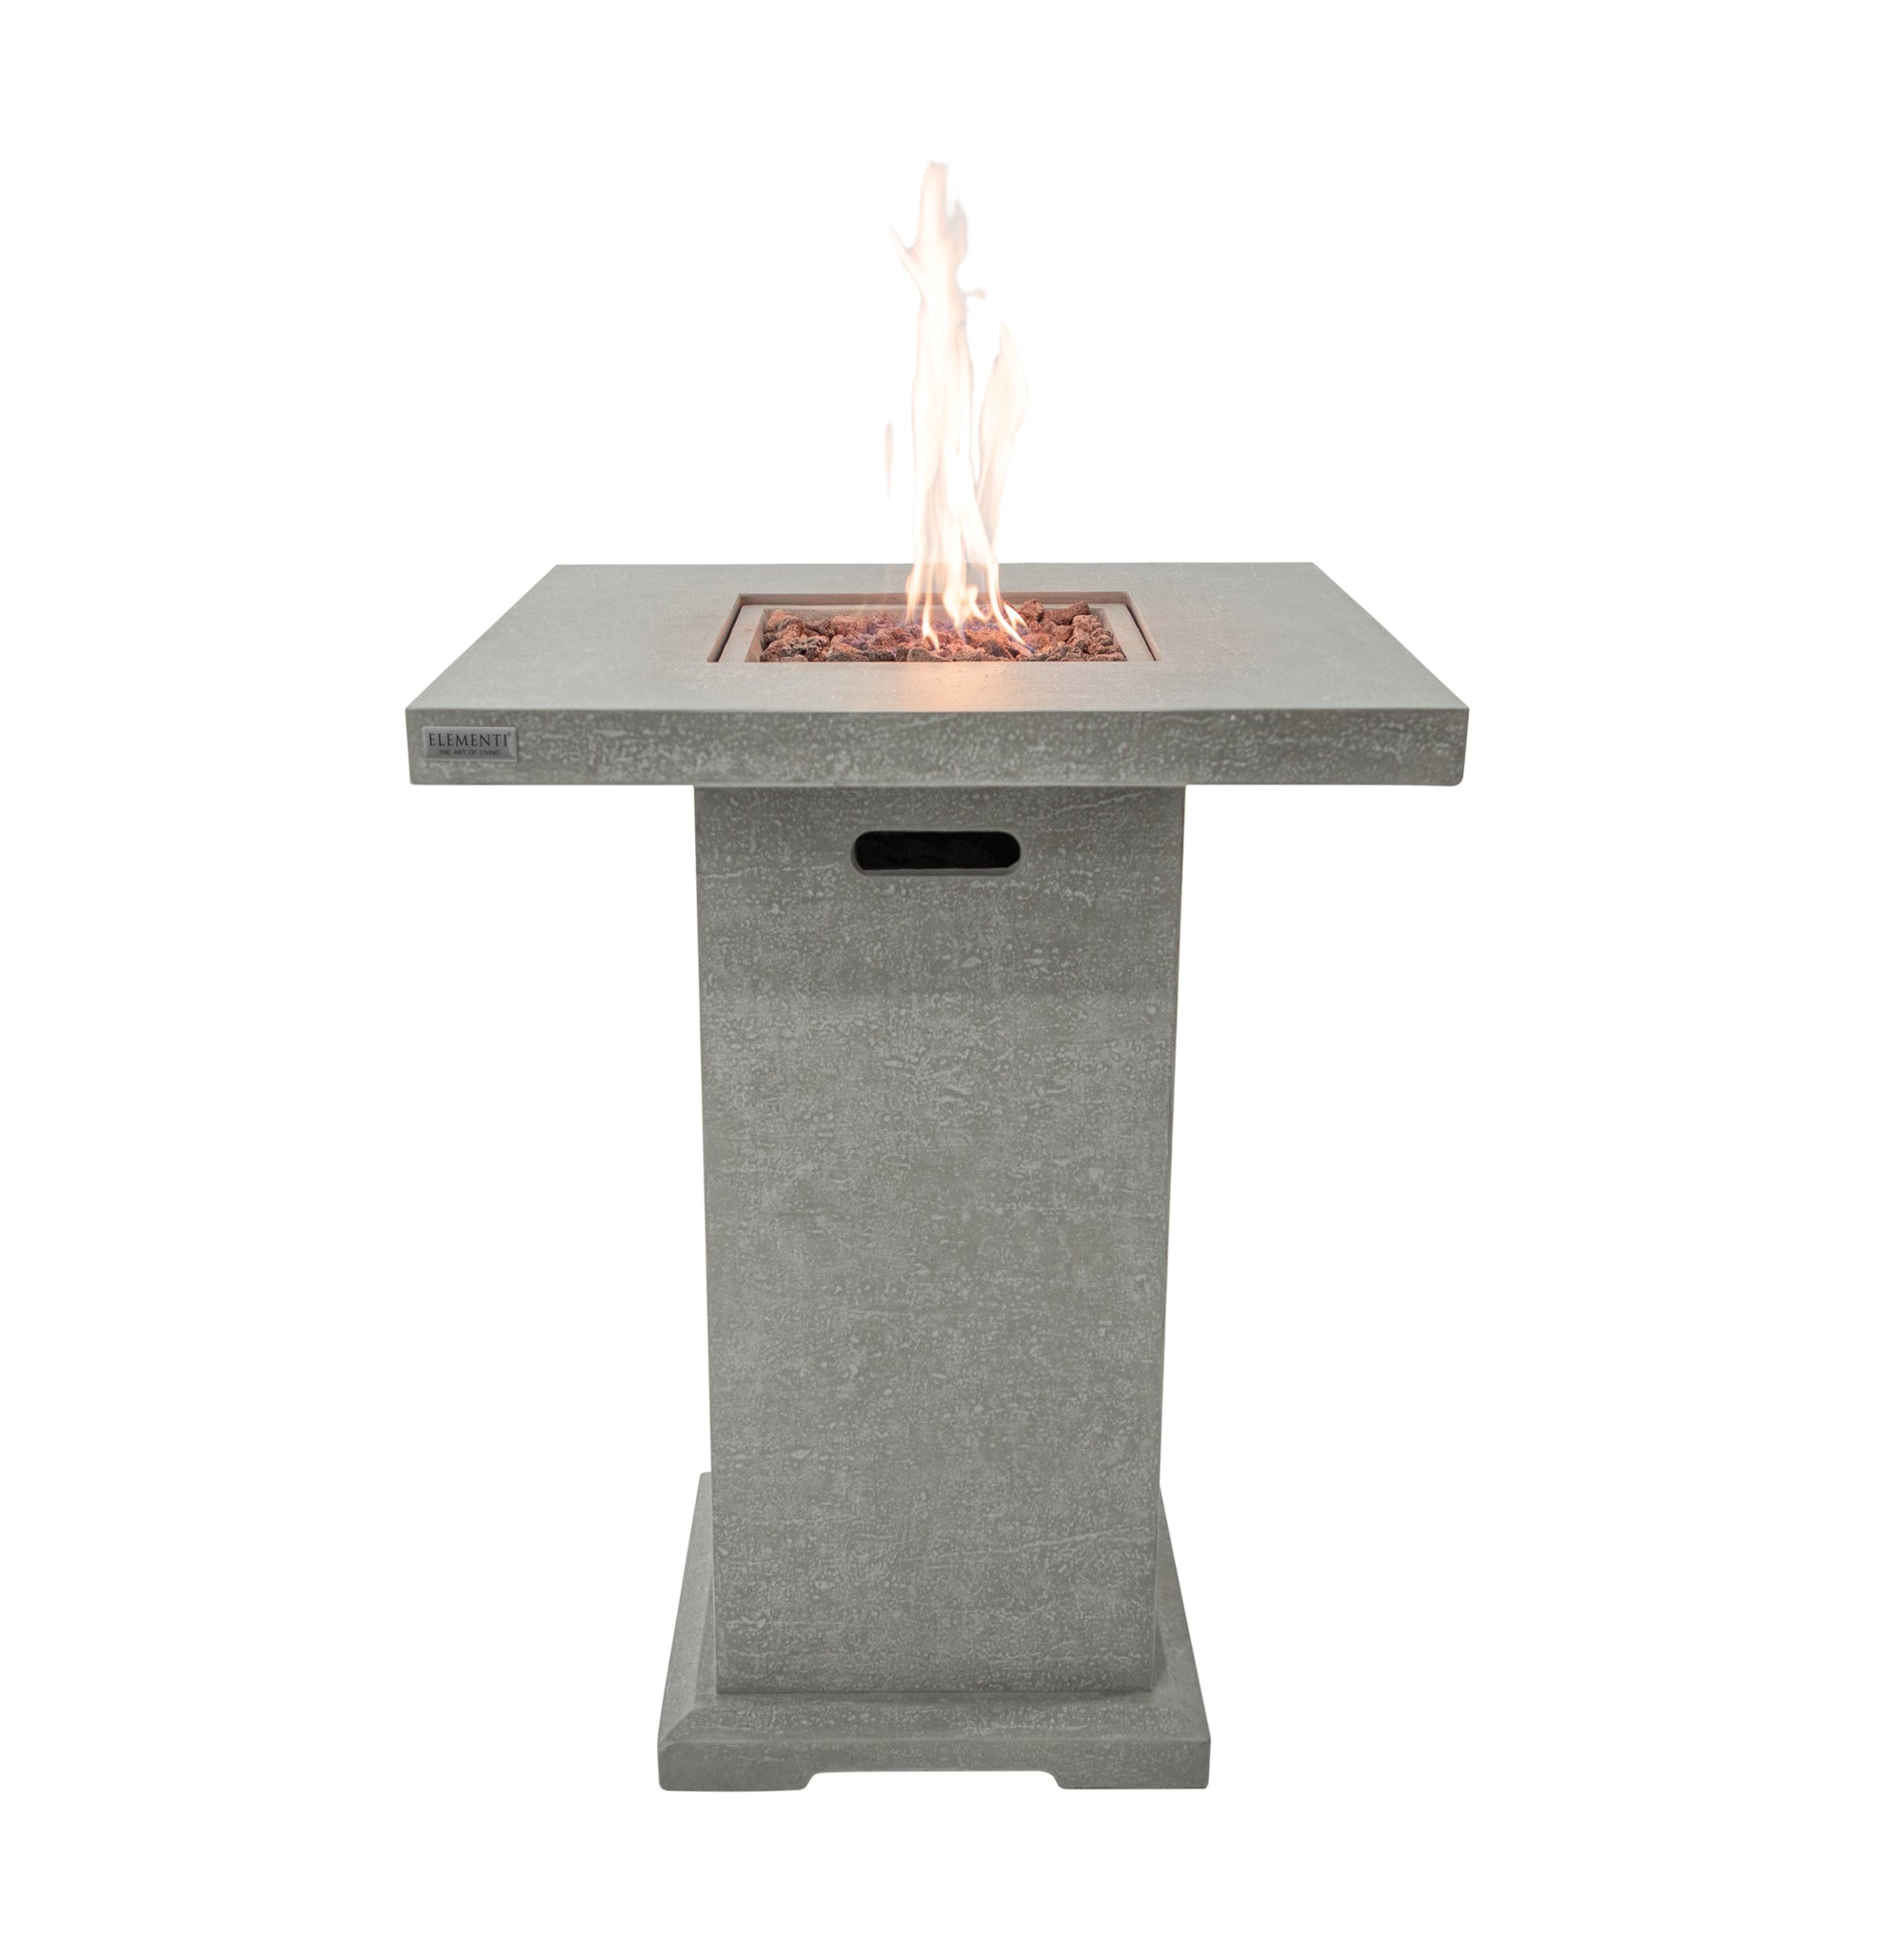 Elementi Montreal Bar Table in Light Gray lit